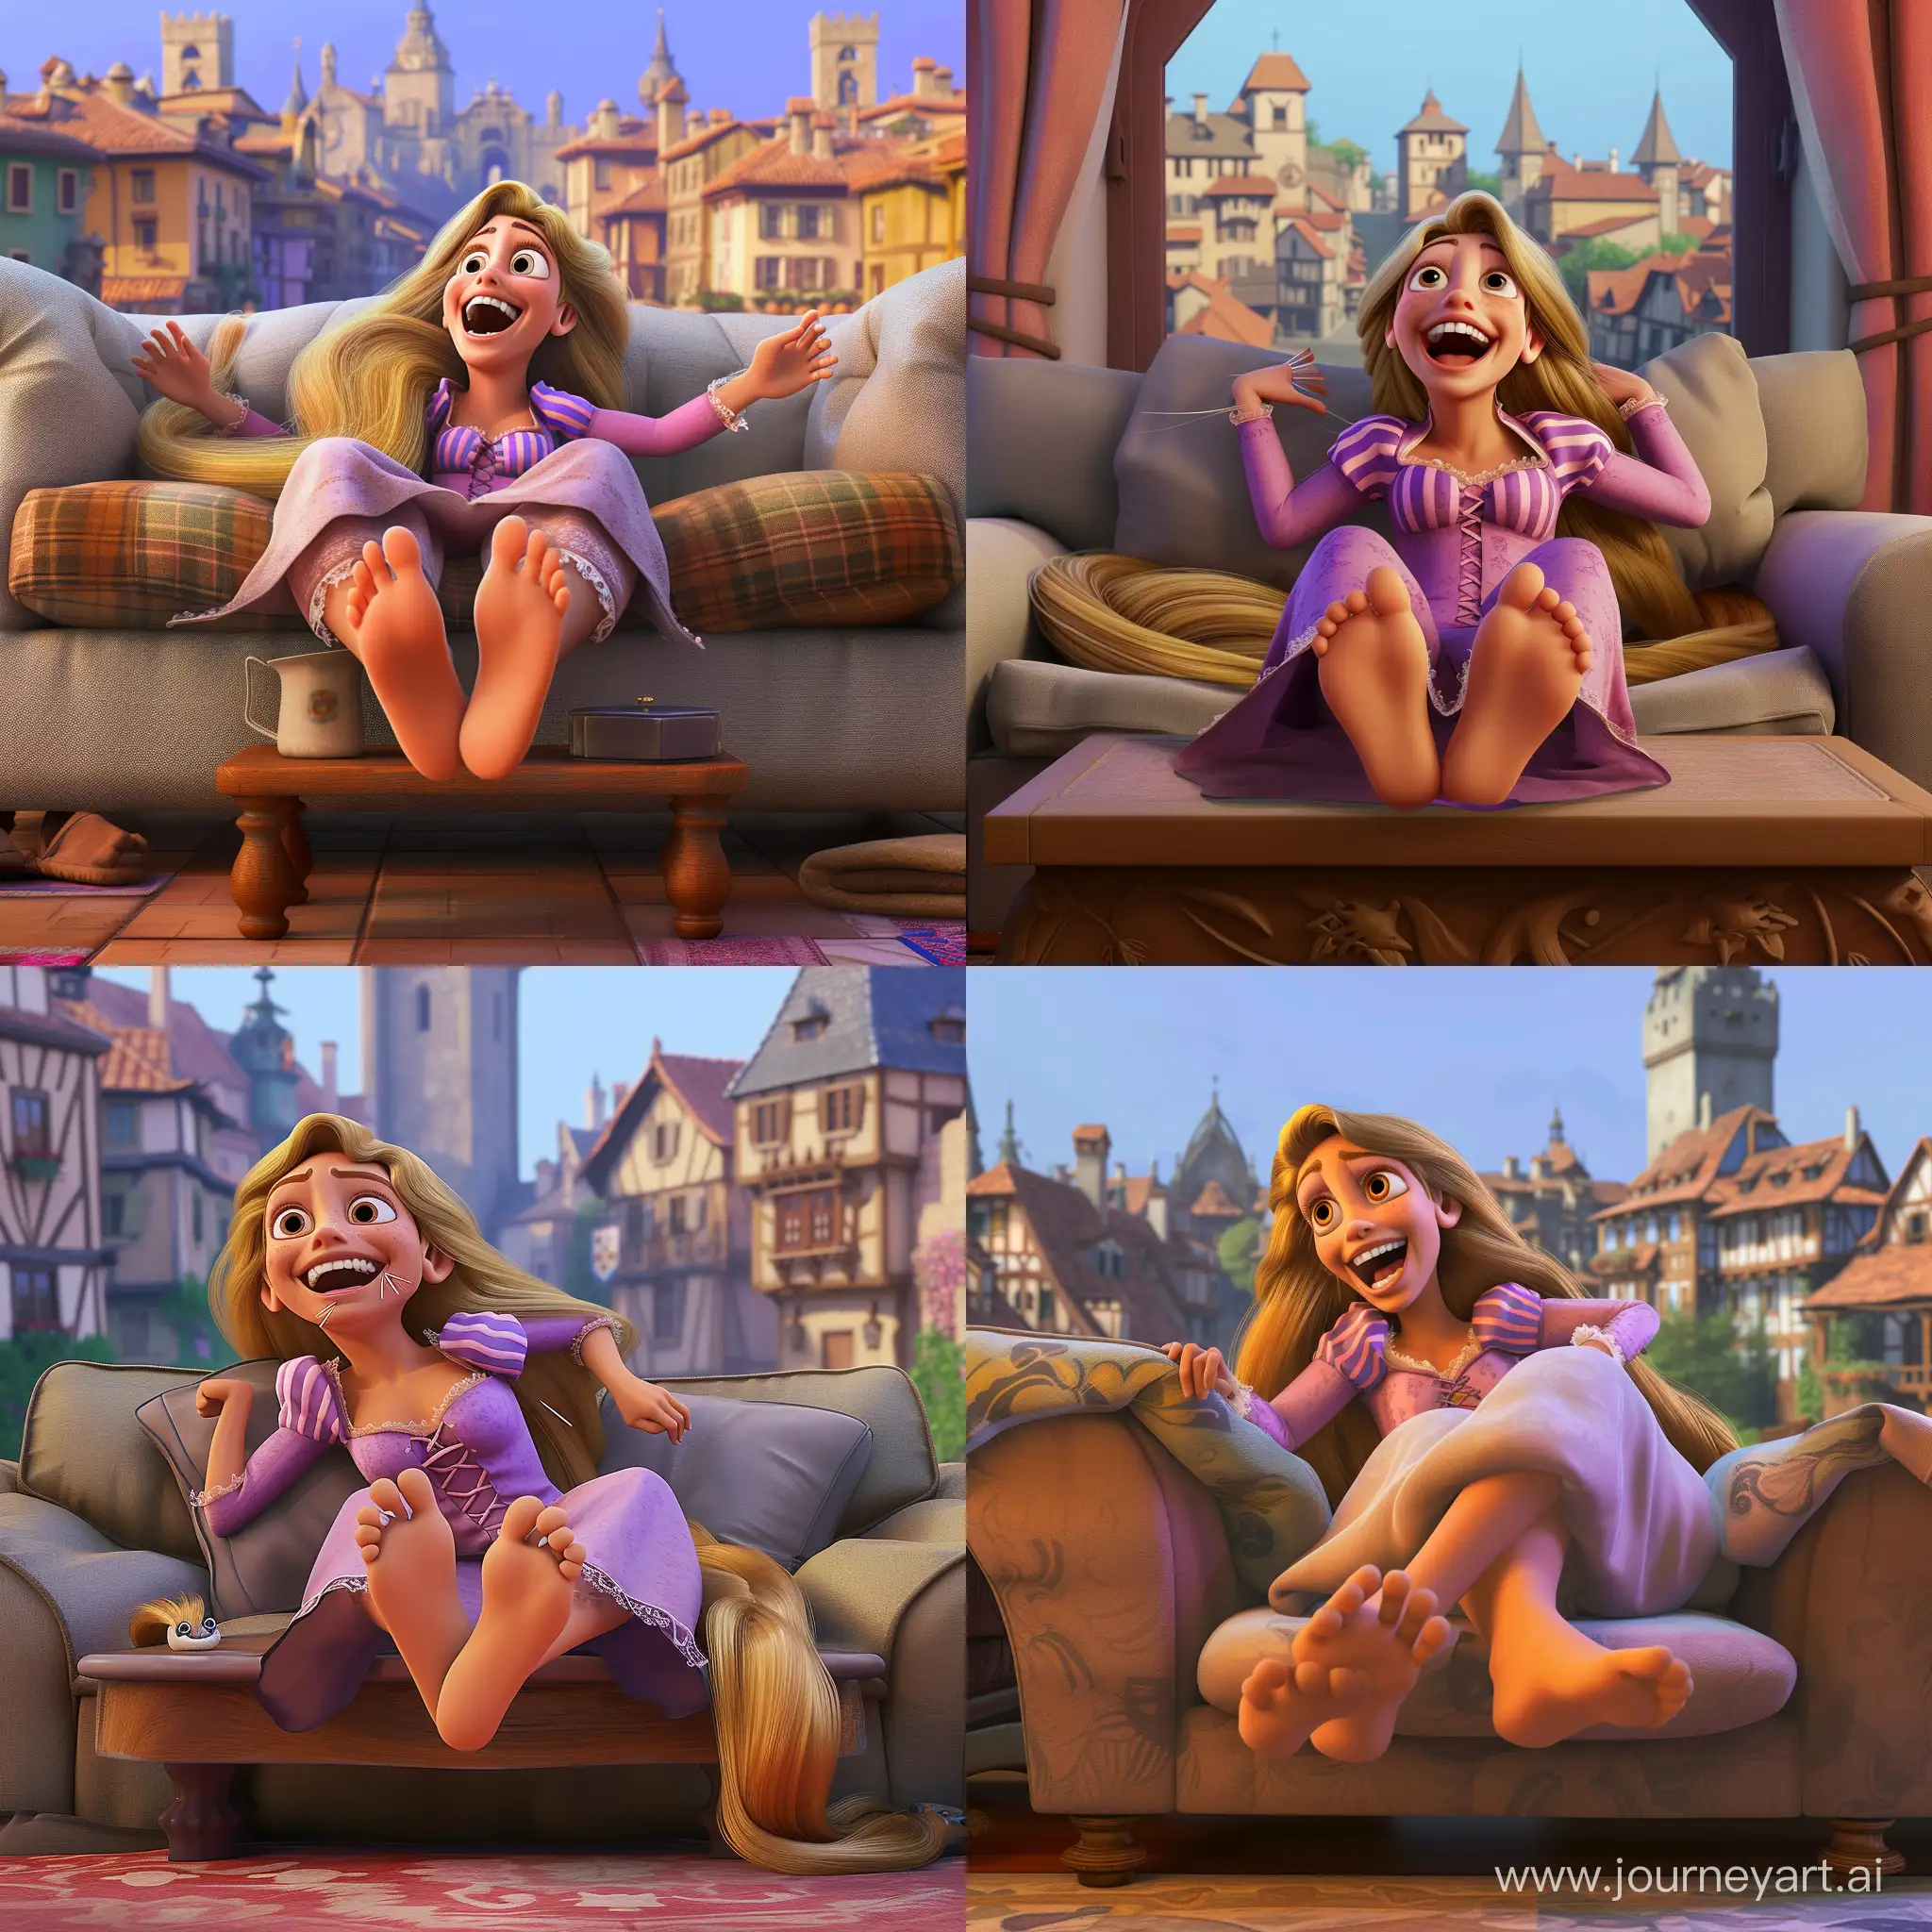 Pixar-style front view detailed 3D render of Rapunzel wearing a nightgown and laying on couch with feet propped on coffee table, Rapunzel from Tangled, being tickled playfully by brushes scratching Rapunzel's ankles, Rapunzel is laughing hysterically and her arms are behind her back and wiggle her ten toes, laughing wide smile expression, medieval town center background